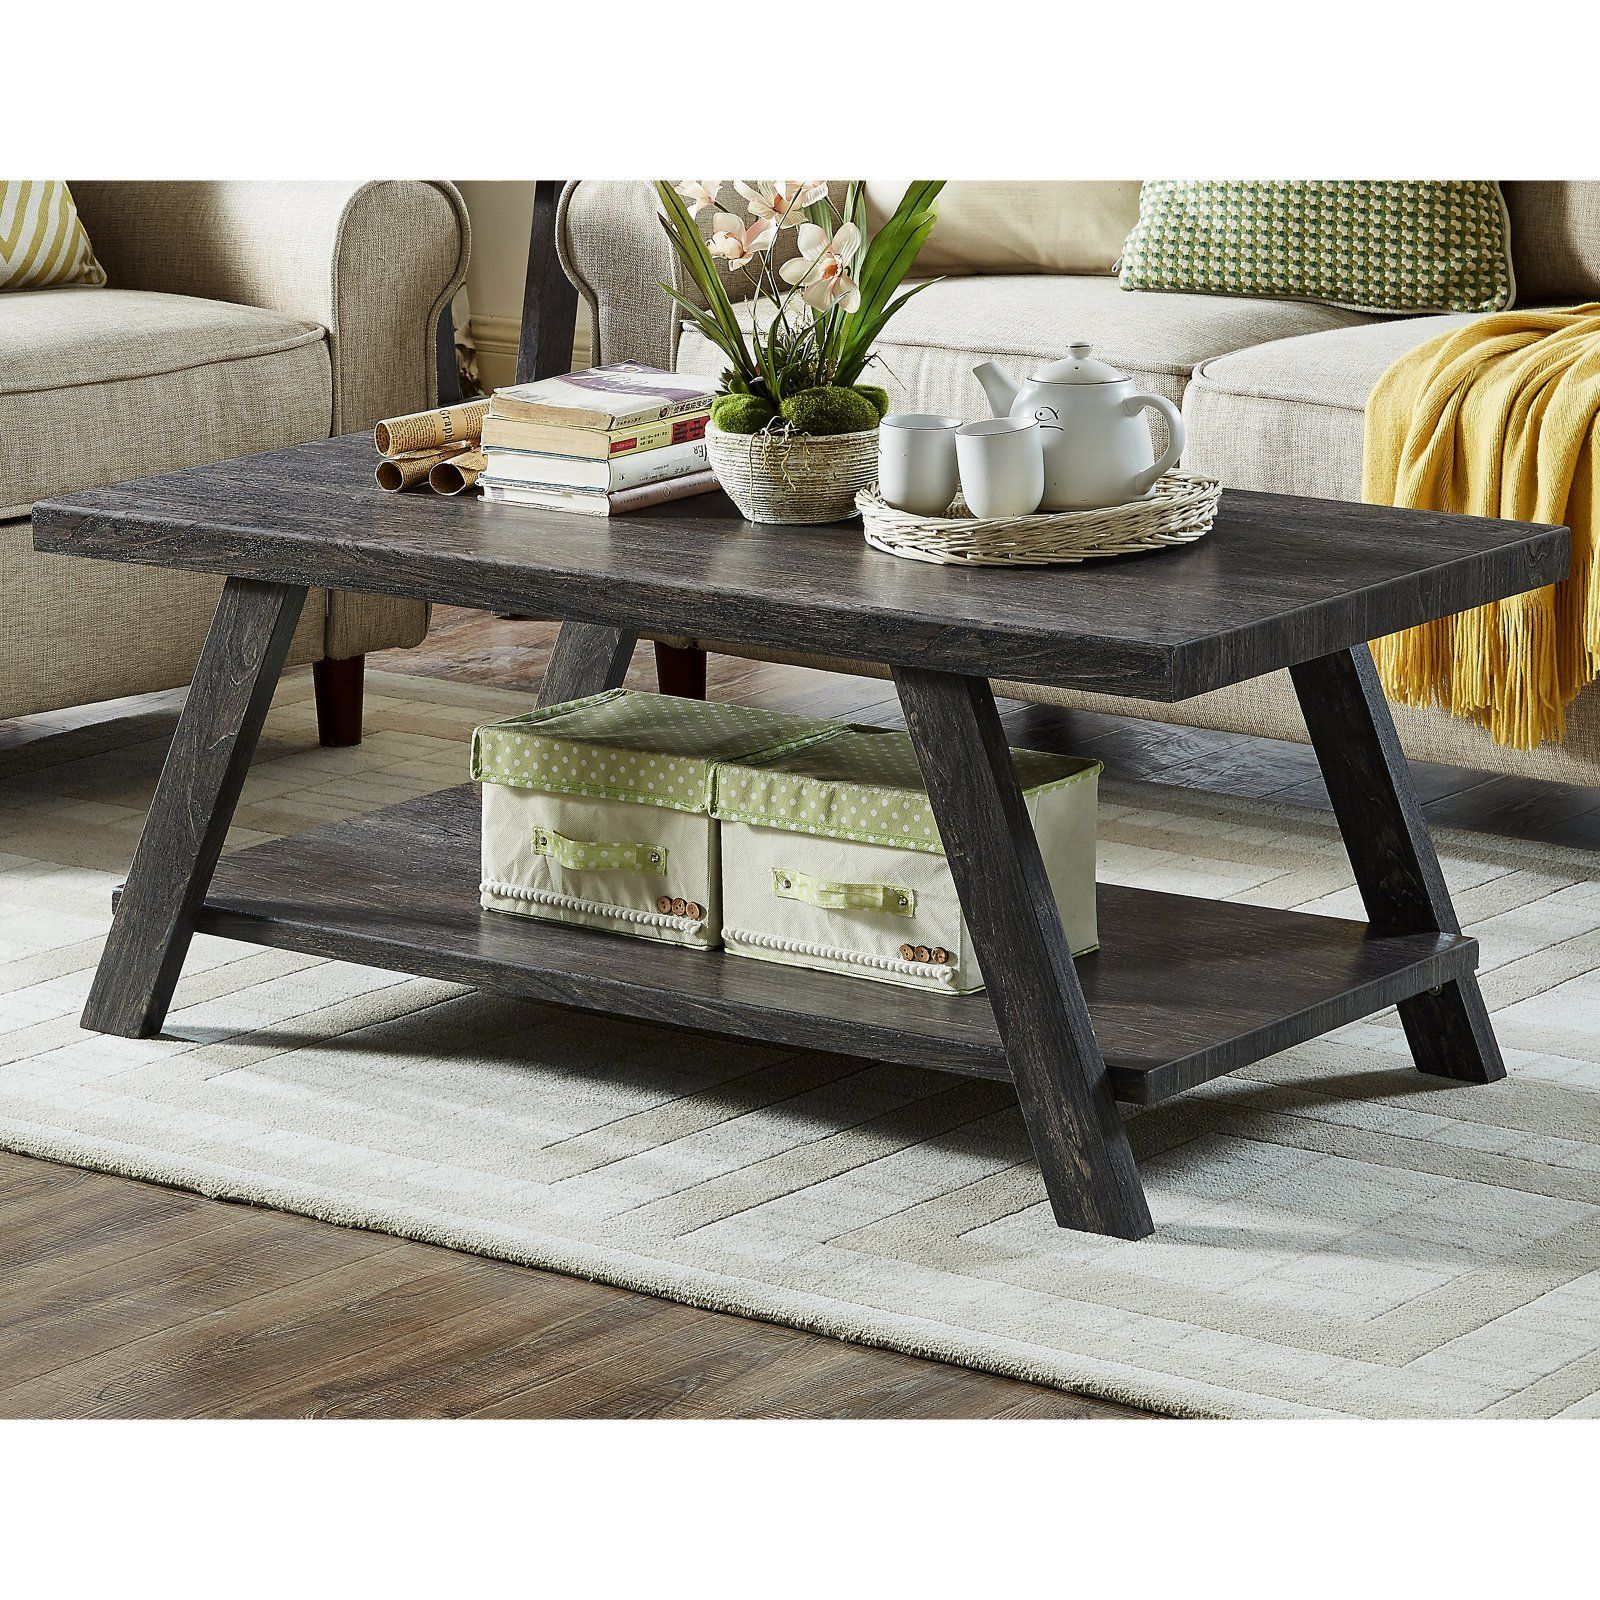 Dimensions: 48w X 24d X 19h In.. Wood And Hardwood Veneer Construction Pertaining To Pemberly Row Replicated Wood Coffee Tables (Photo 5 of 15)